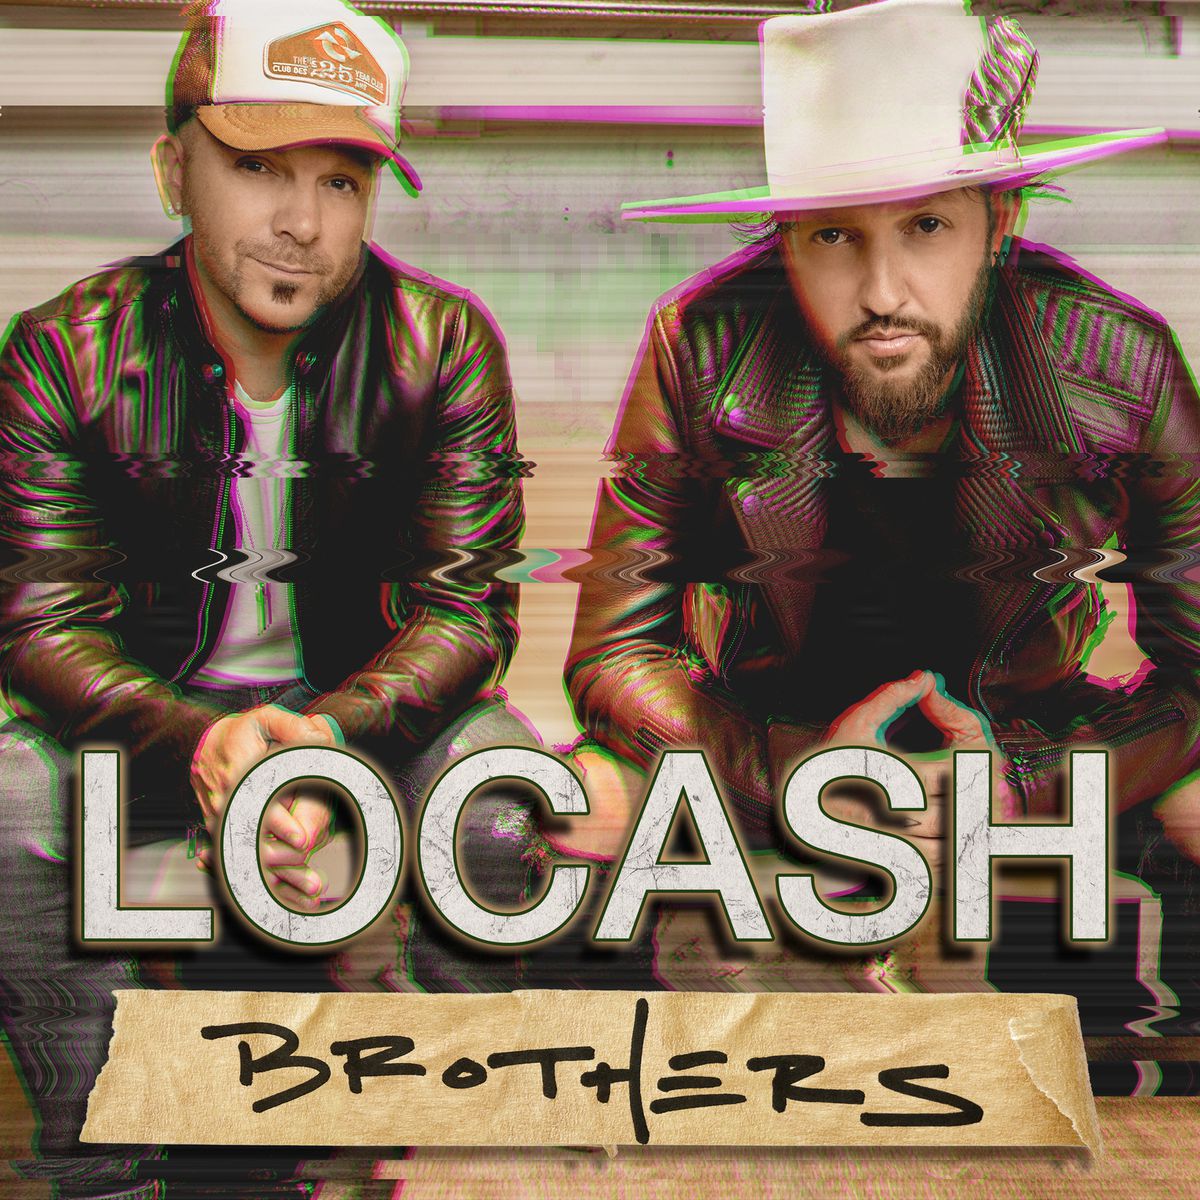 This cover image released by Wheelhouse Records shows “Brothers,” a release by Locash. | Wheelhouse Records via AP